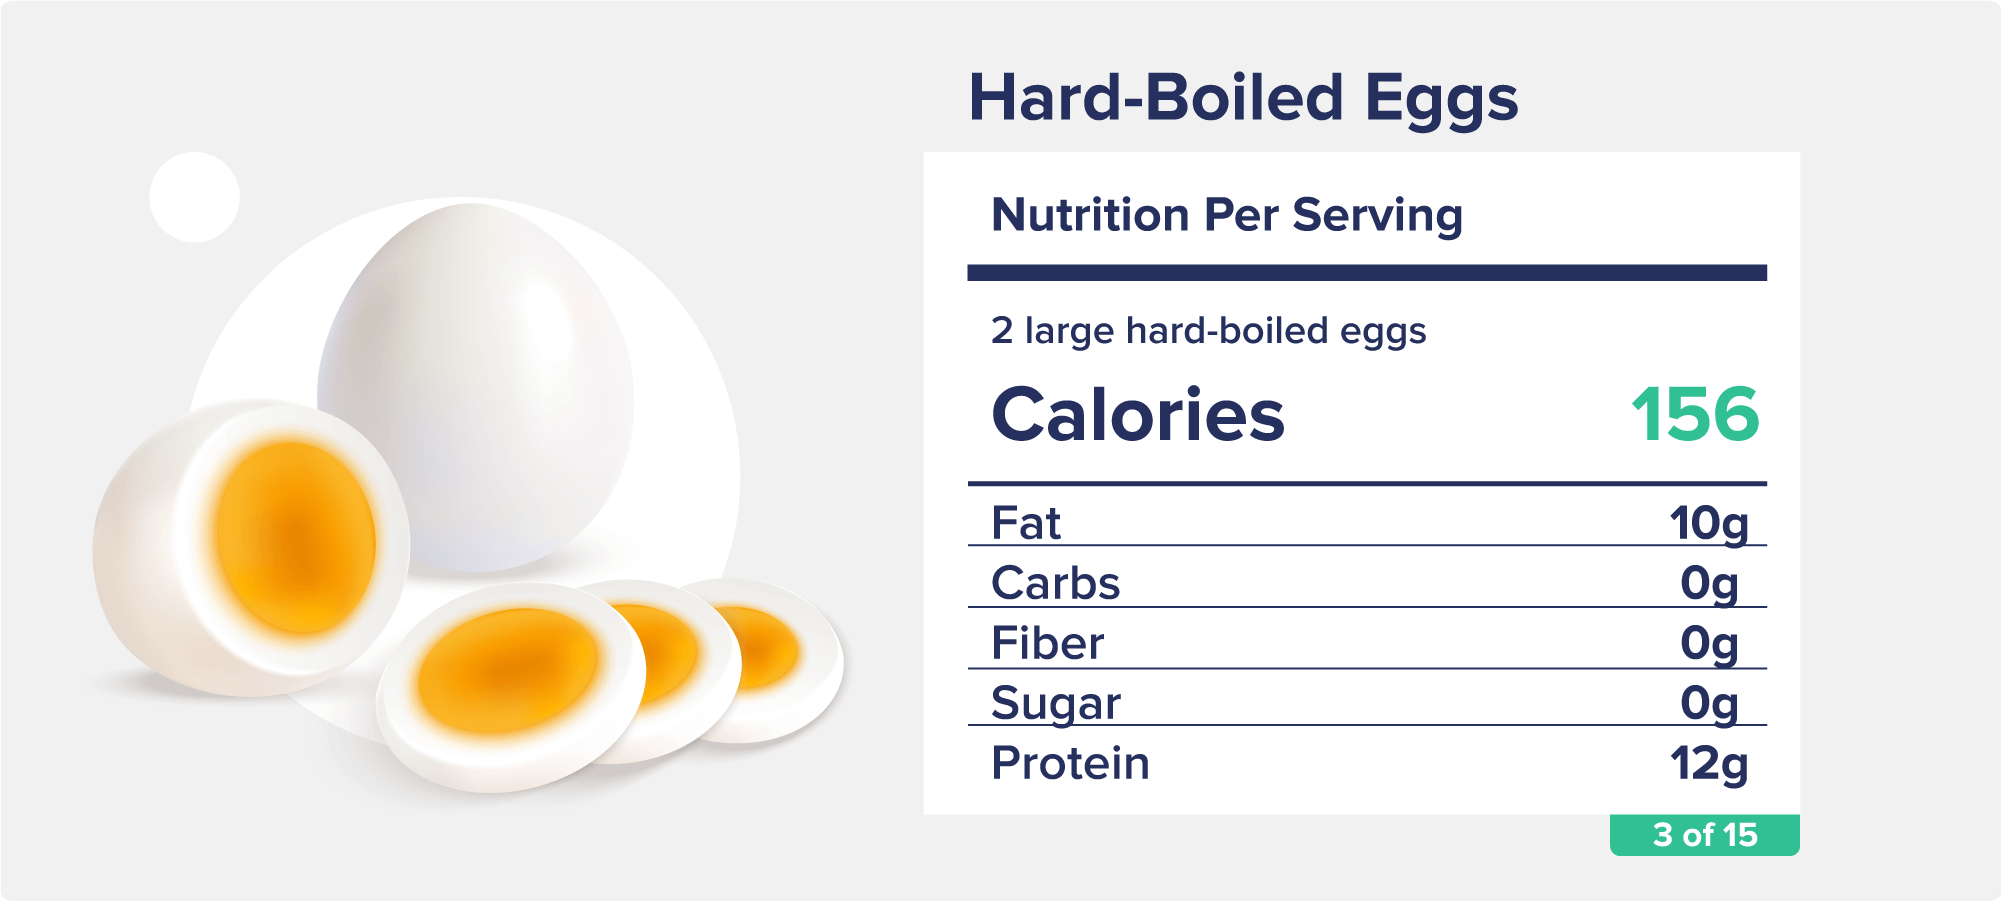 A picture of hard-boiled eggs with accompanying nutrition facts like calories, fat, and protein.